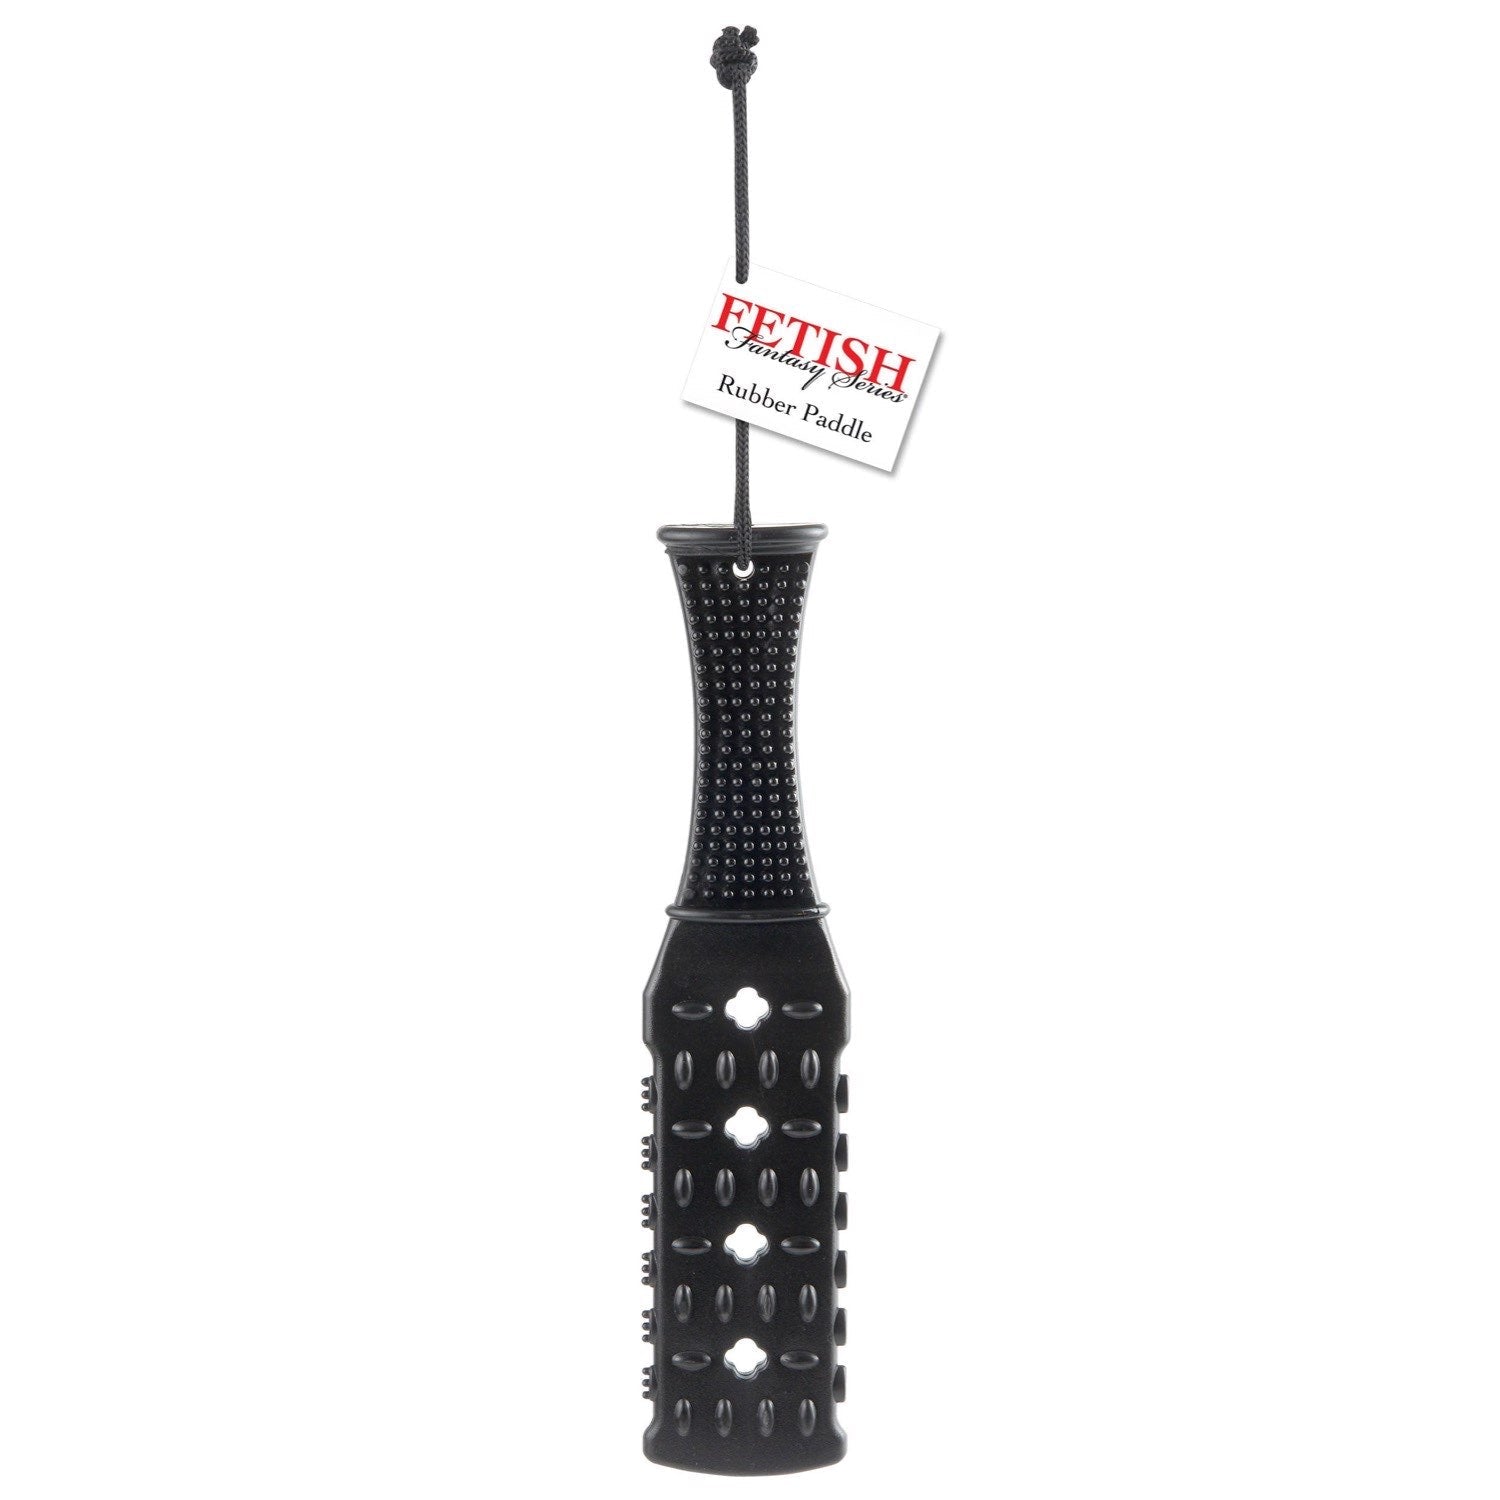 Fetish Fantasy Series Rubber Paddle - Black Paddle by Pipedream